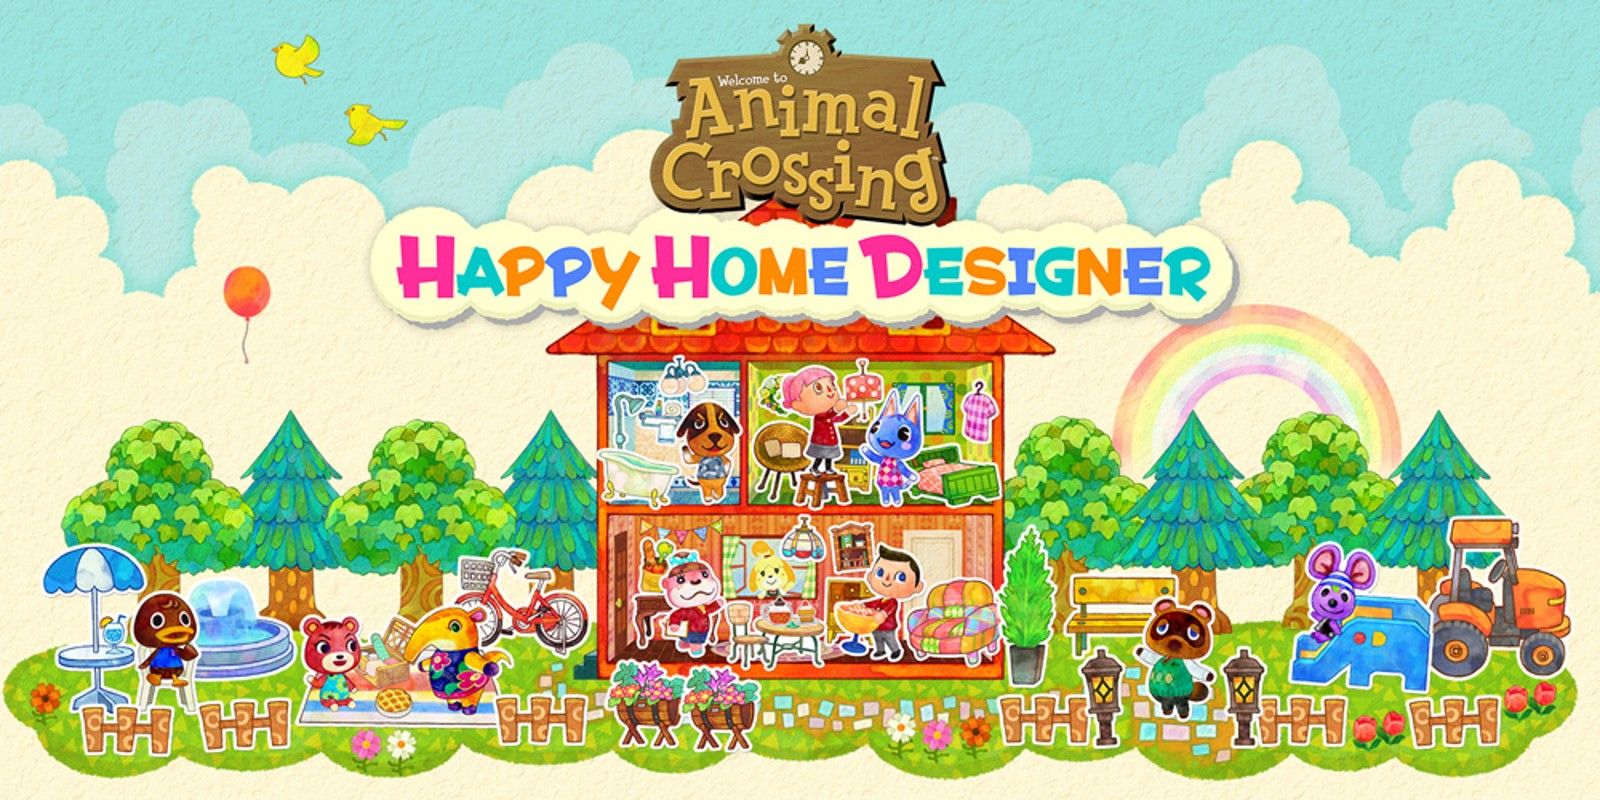 The official art for Animal Crossing: Happy Home Designer